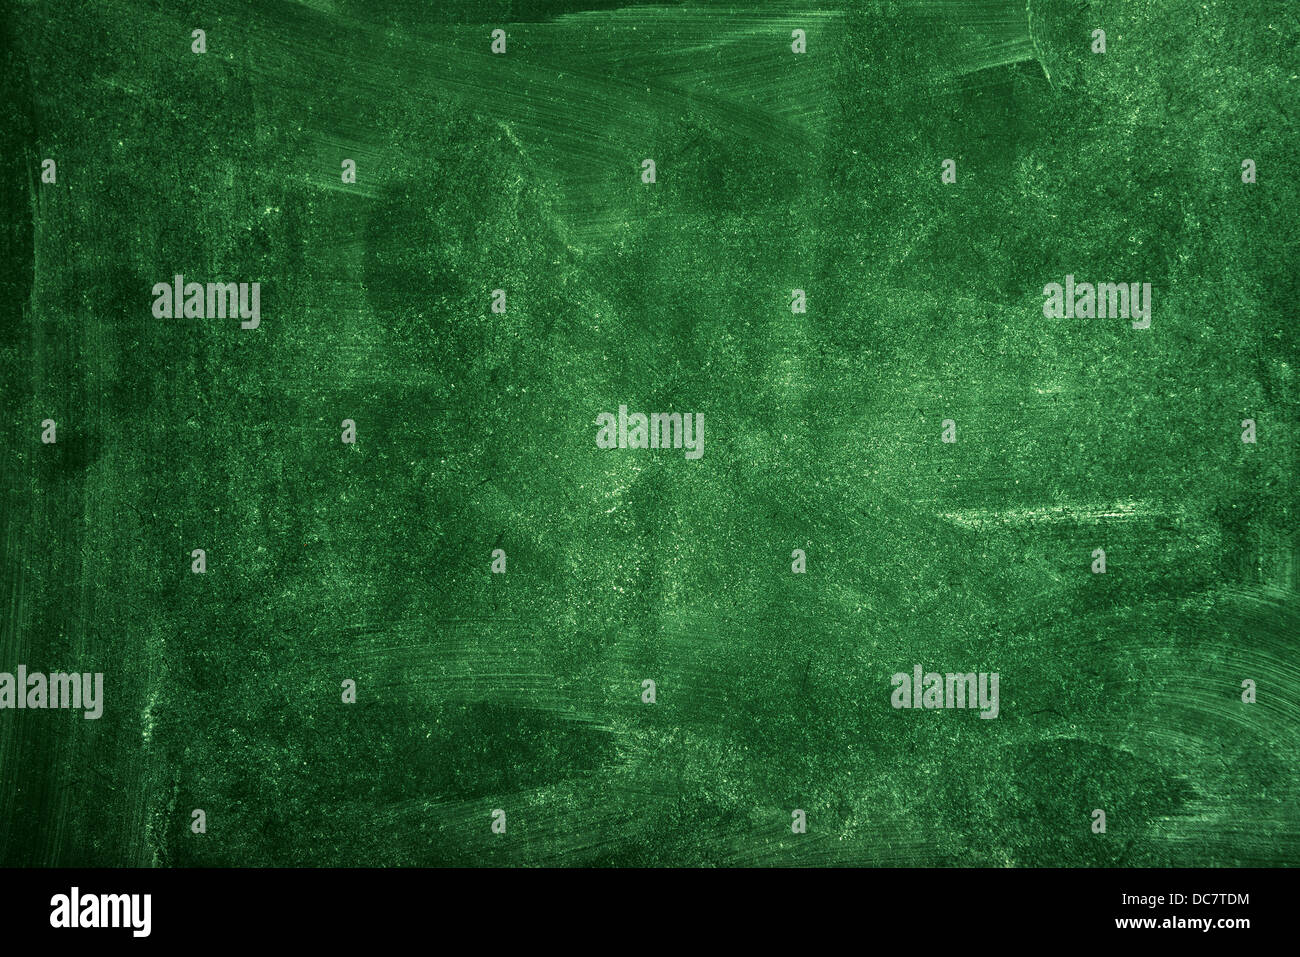 Green school chalkboard texture as background for school themes. Stock Photo